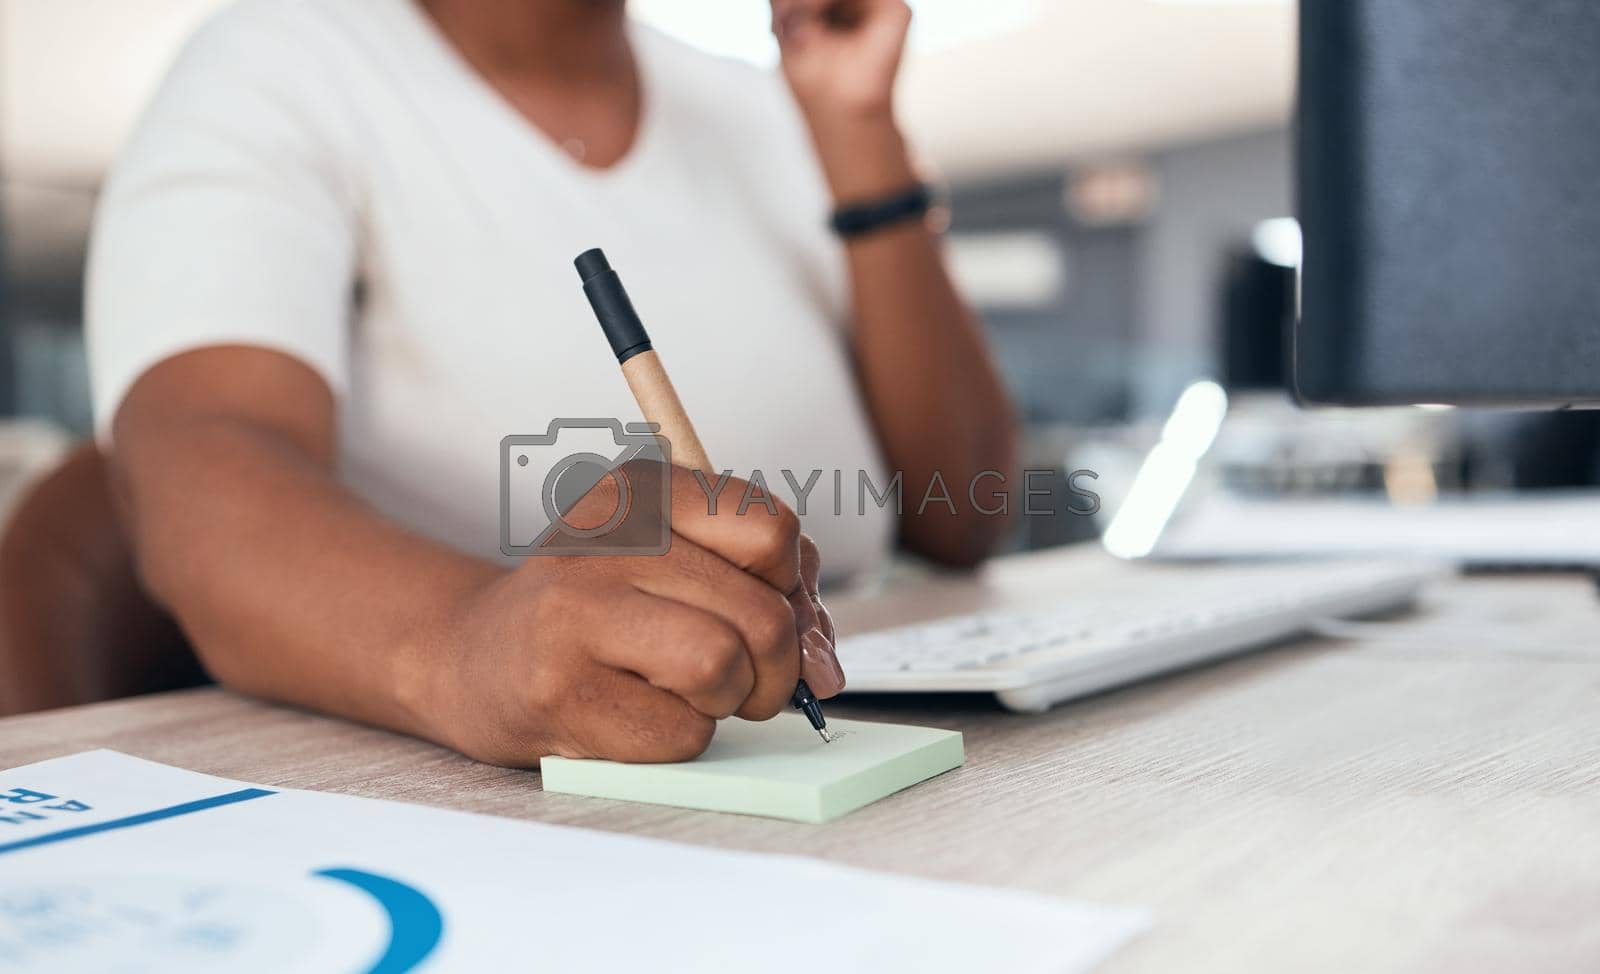 Receptionist, secretary or consultant with phone, writing client info on sticky note. Crm, communication and support, customer service at telemarketing company. Black woman consulting on office phone.